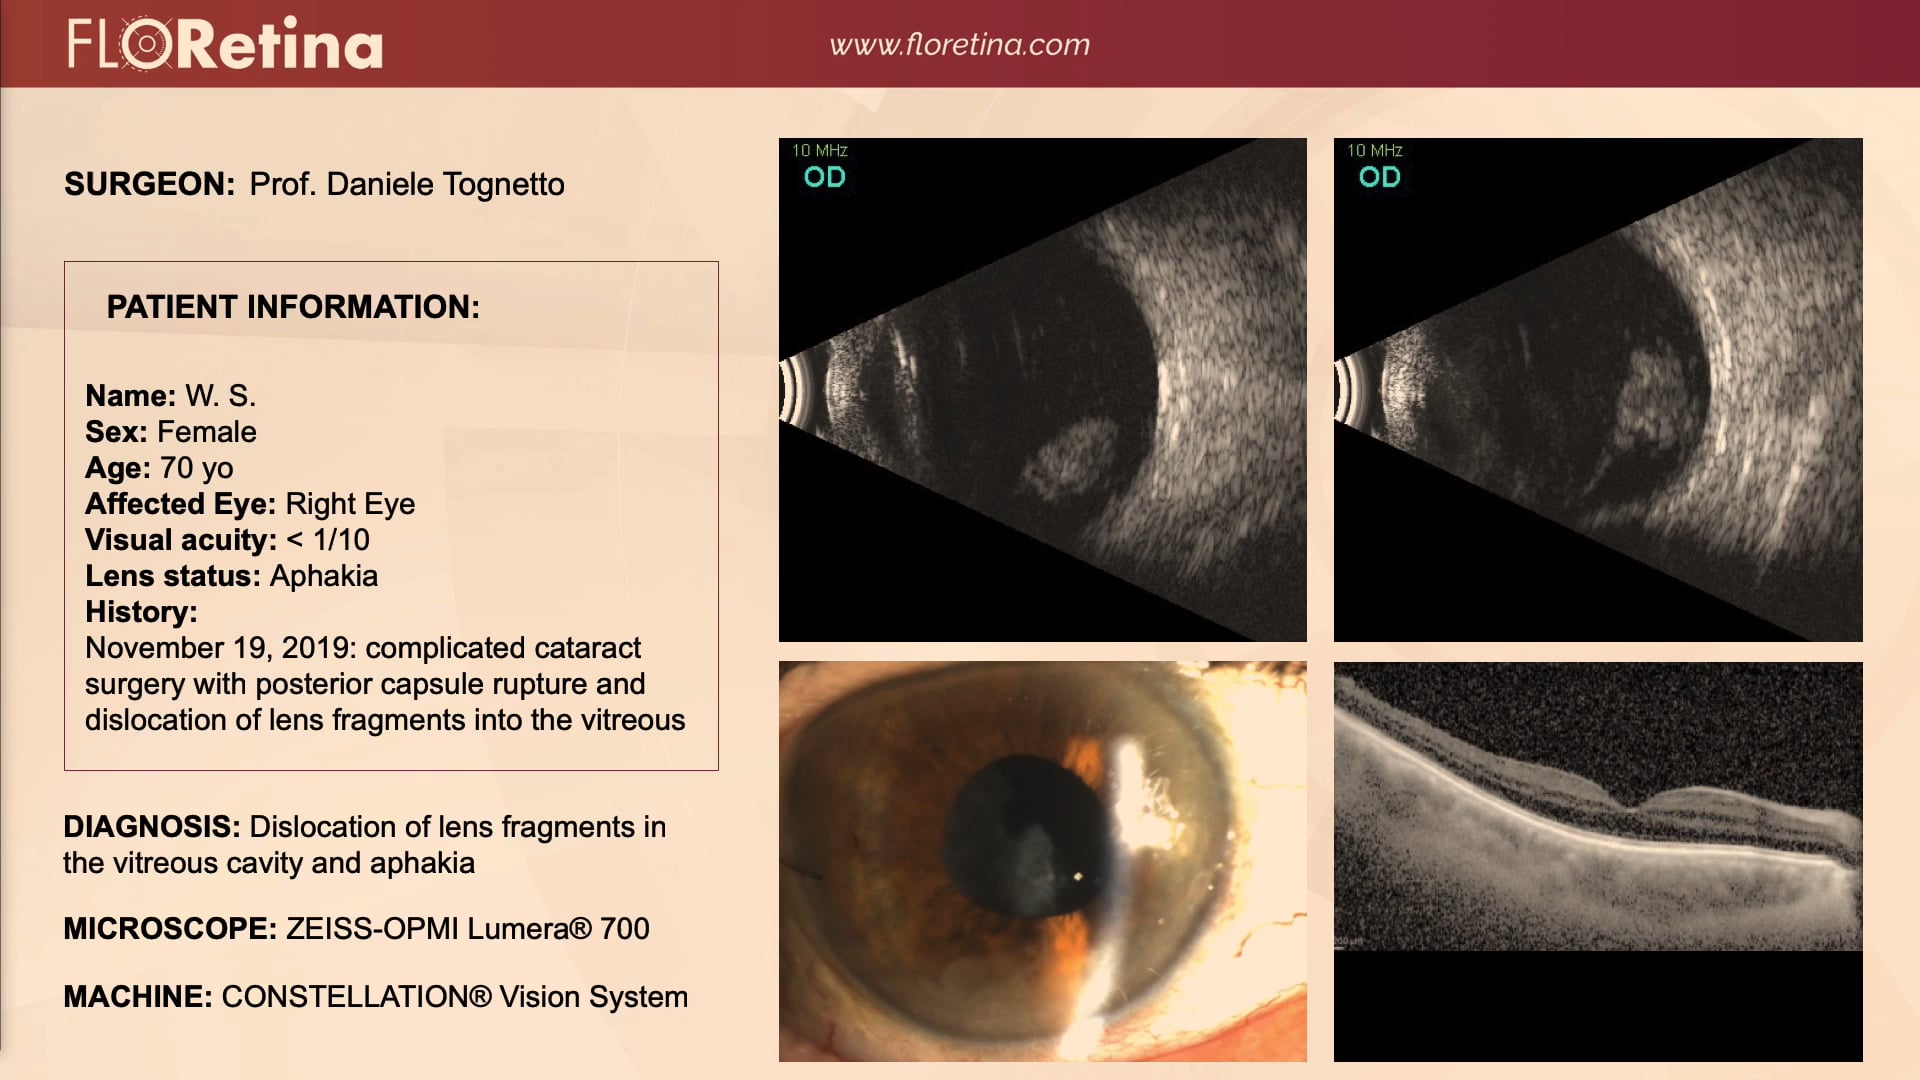 Dislocation Of Lens Fragments In The Vitreous Cavity And Aphakia